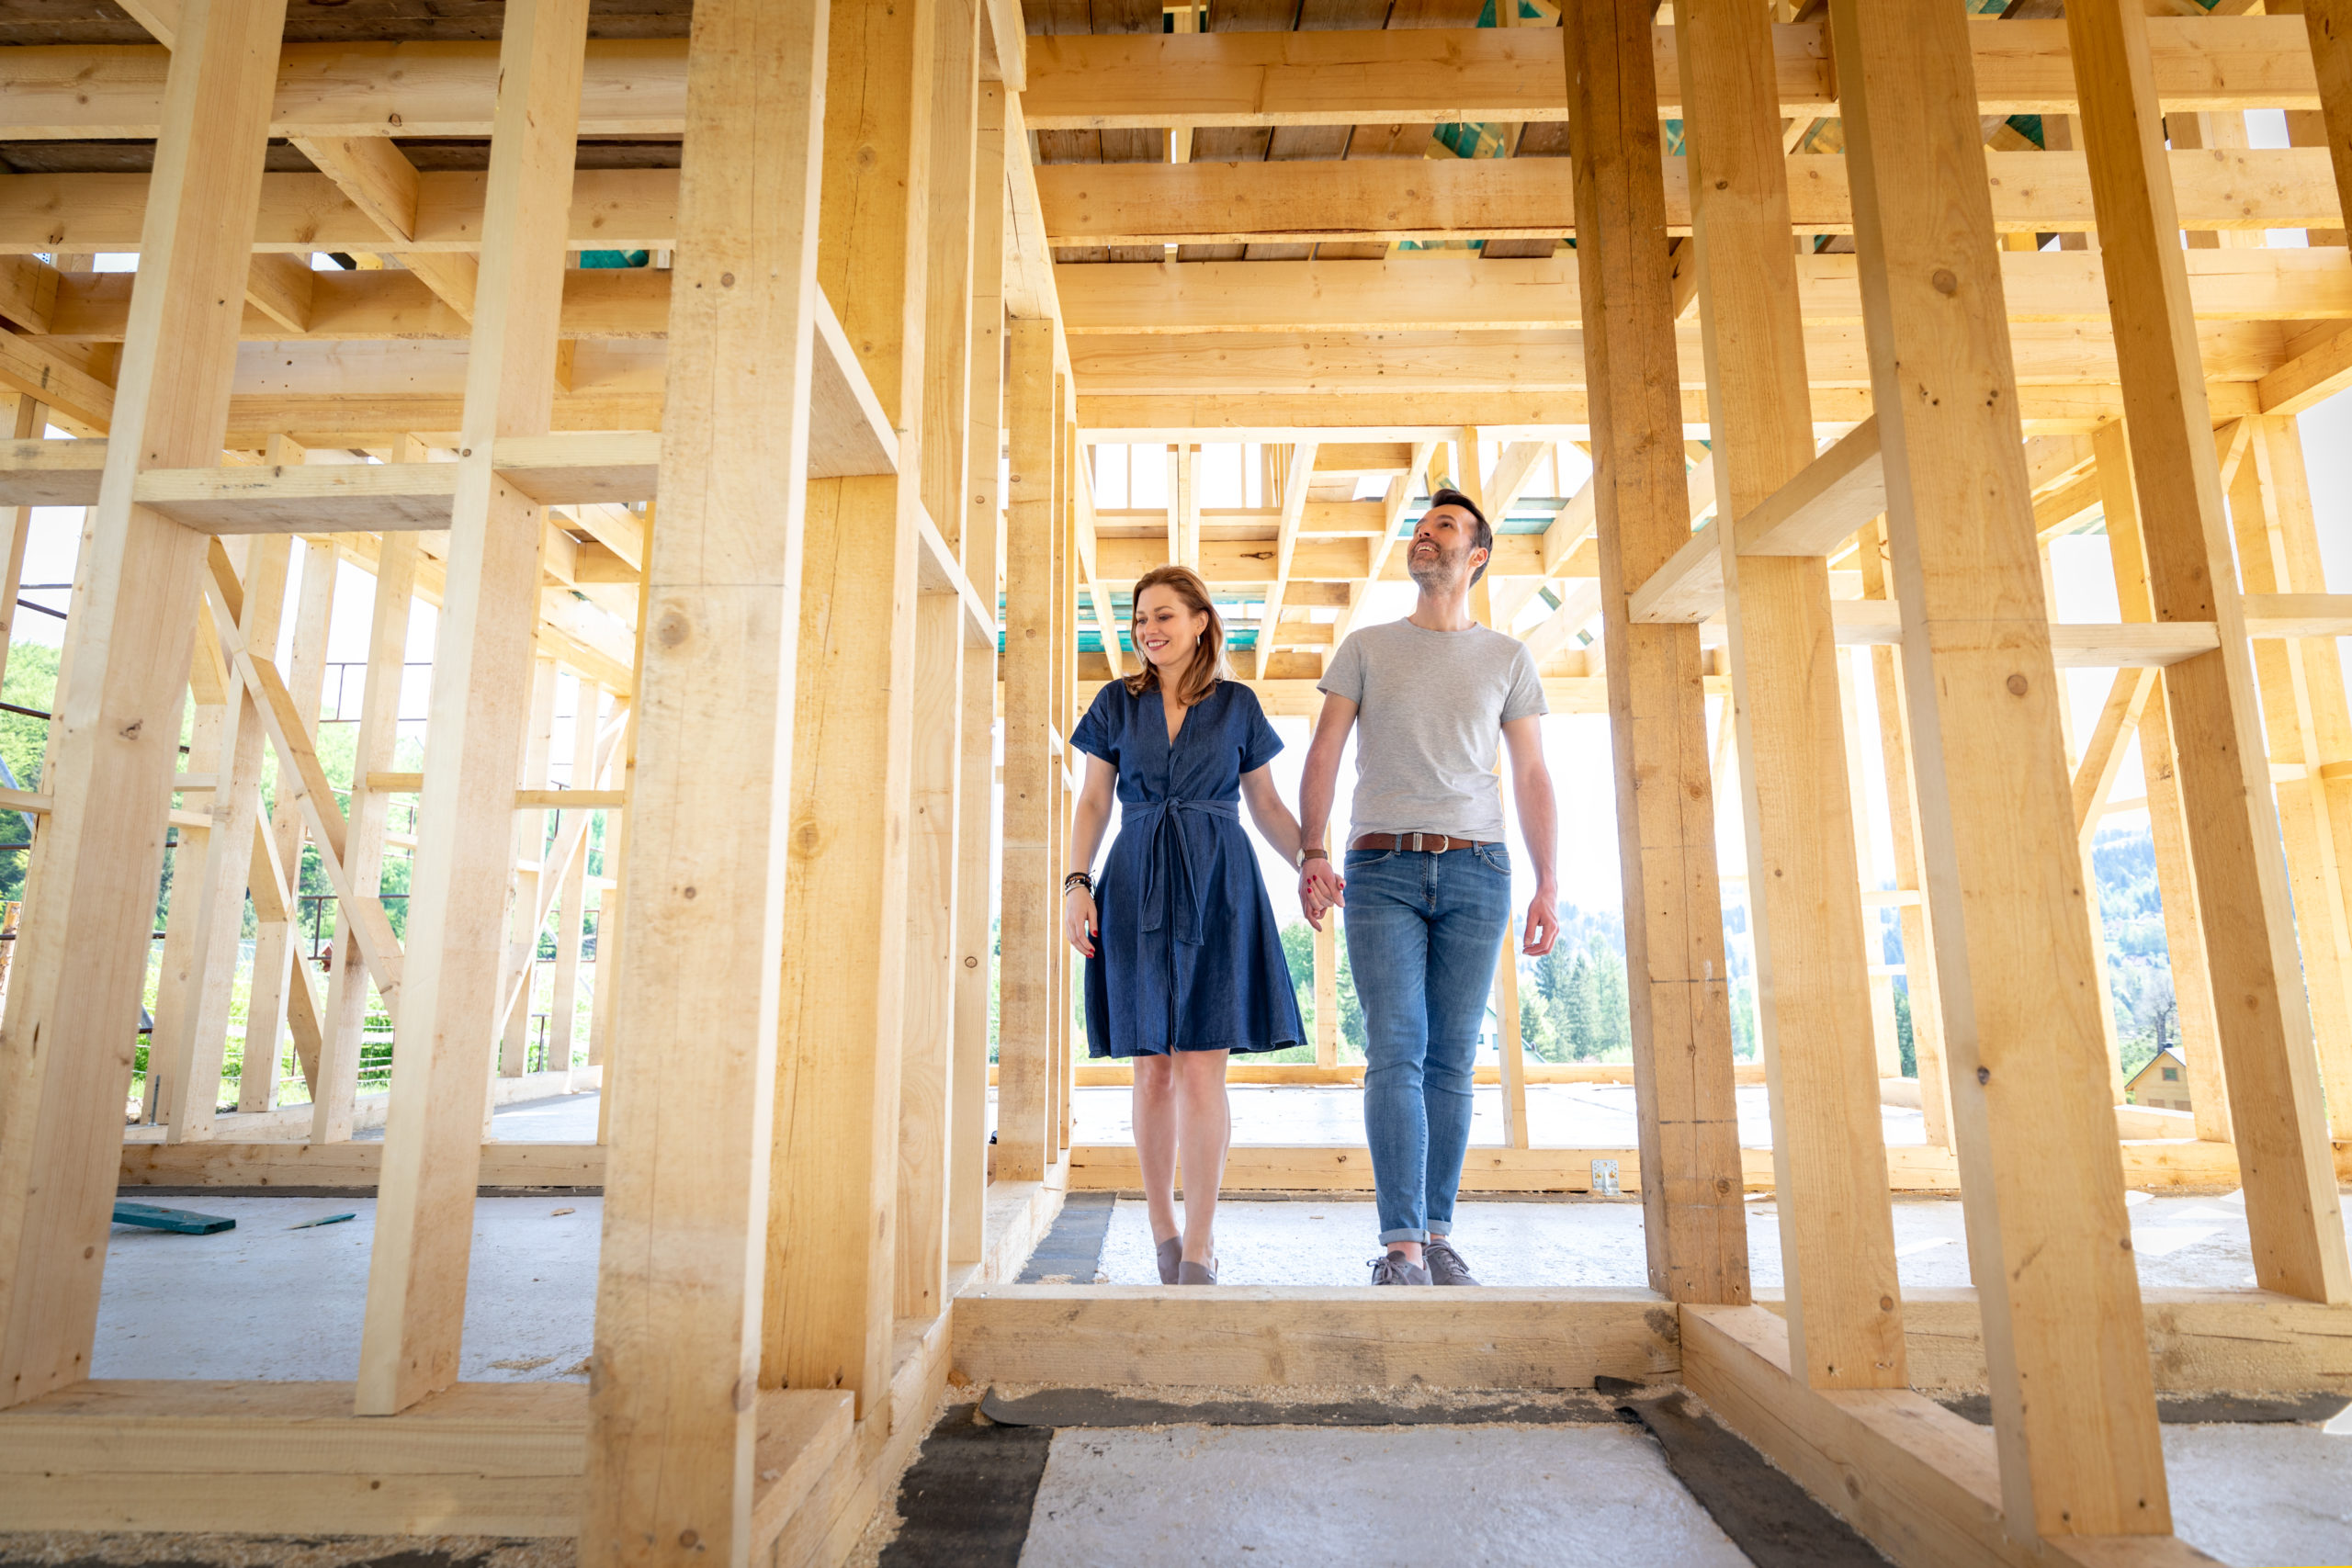 Loving couple at construction site of their new home dreams come true